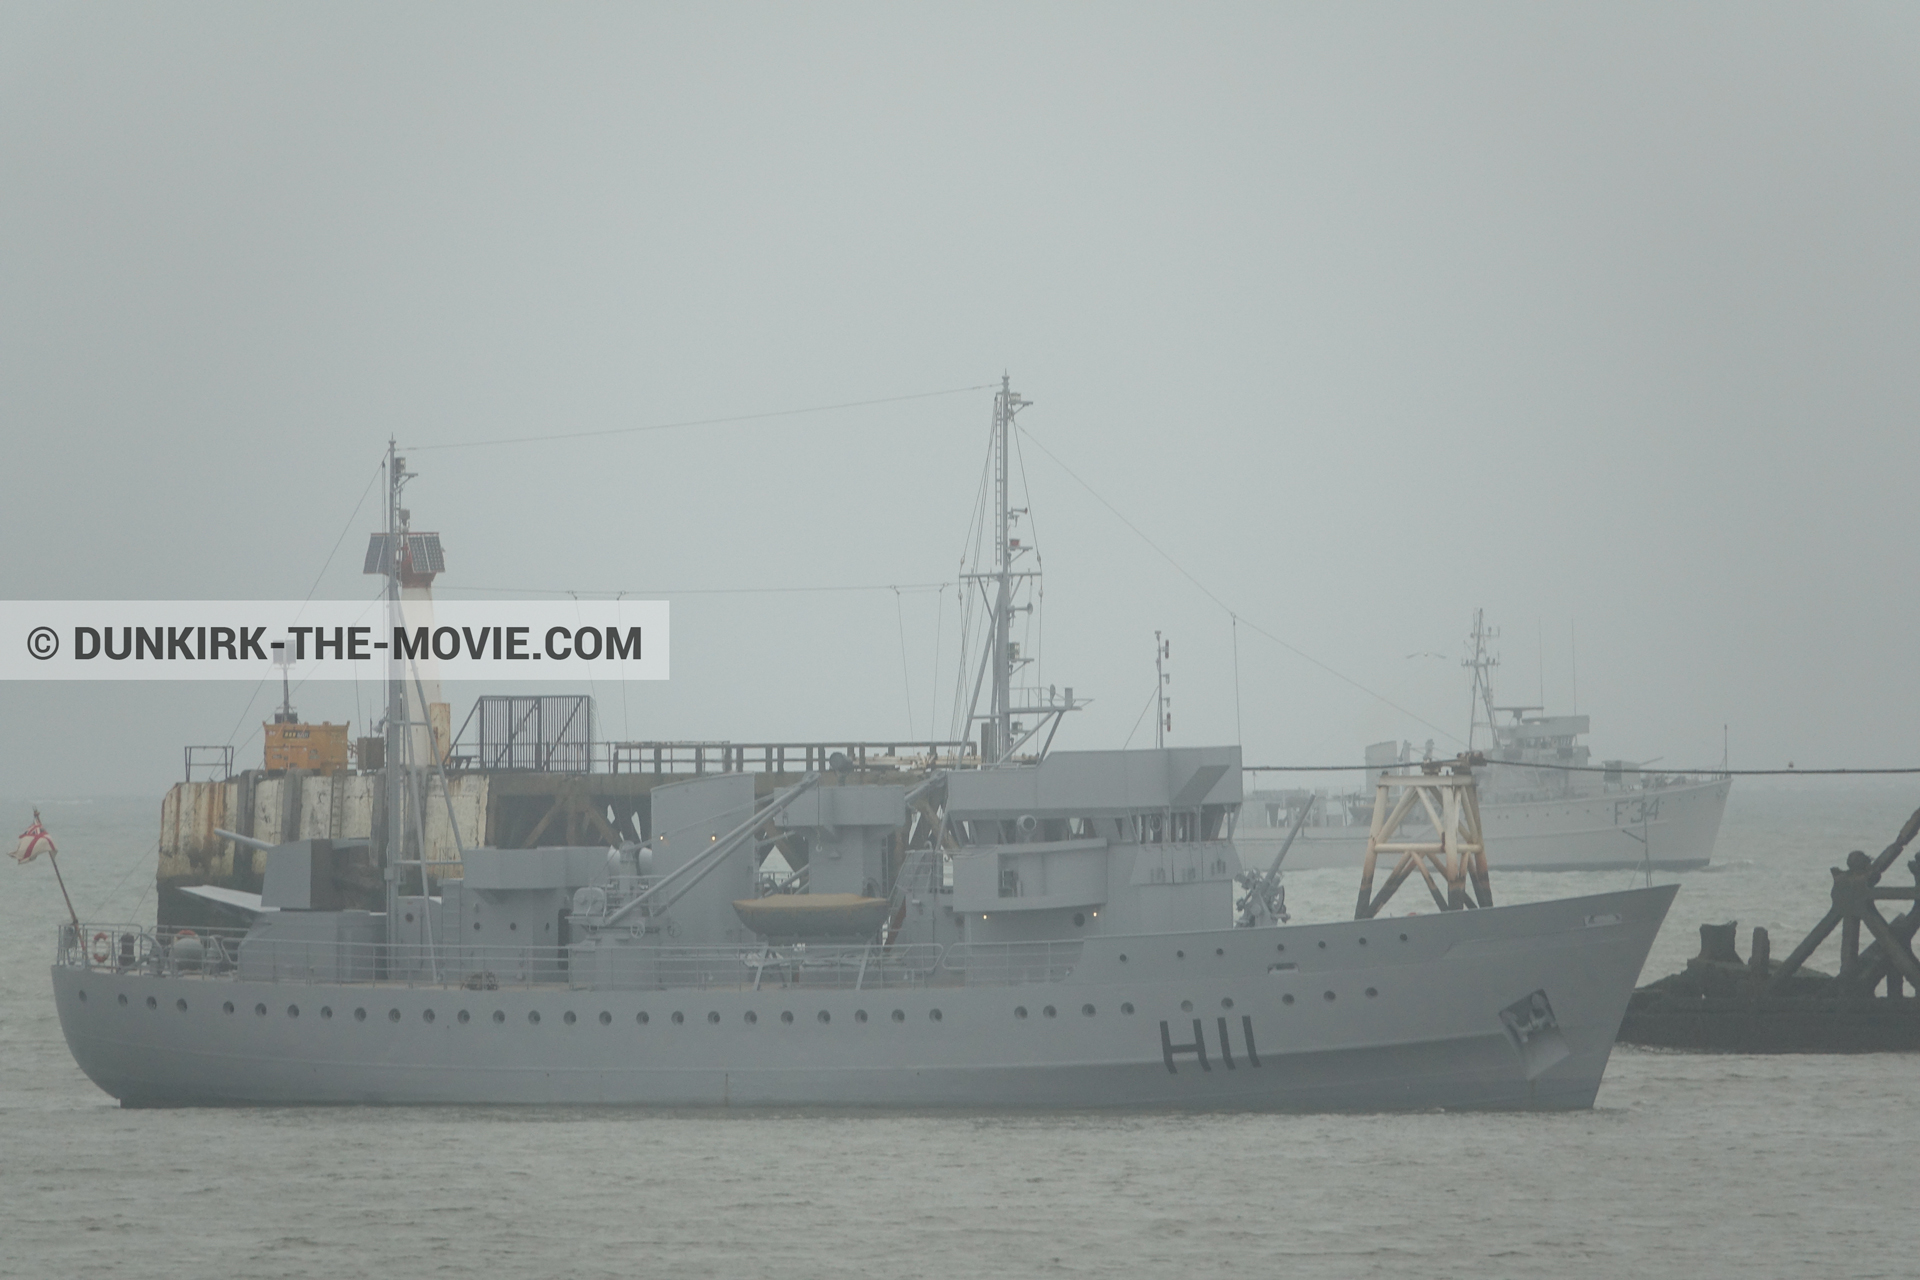 Picture with boat, grey sky, H11 - MLV Castor,  from behind the scene of the Dunkirk movie by Nolan